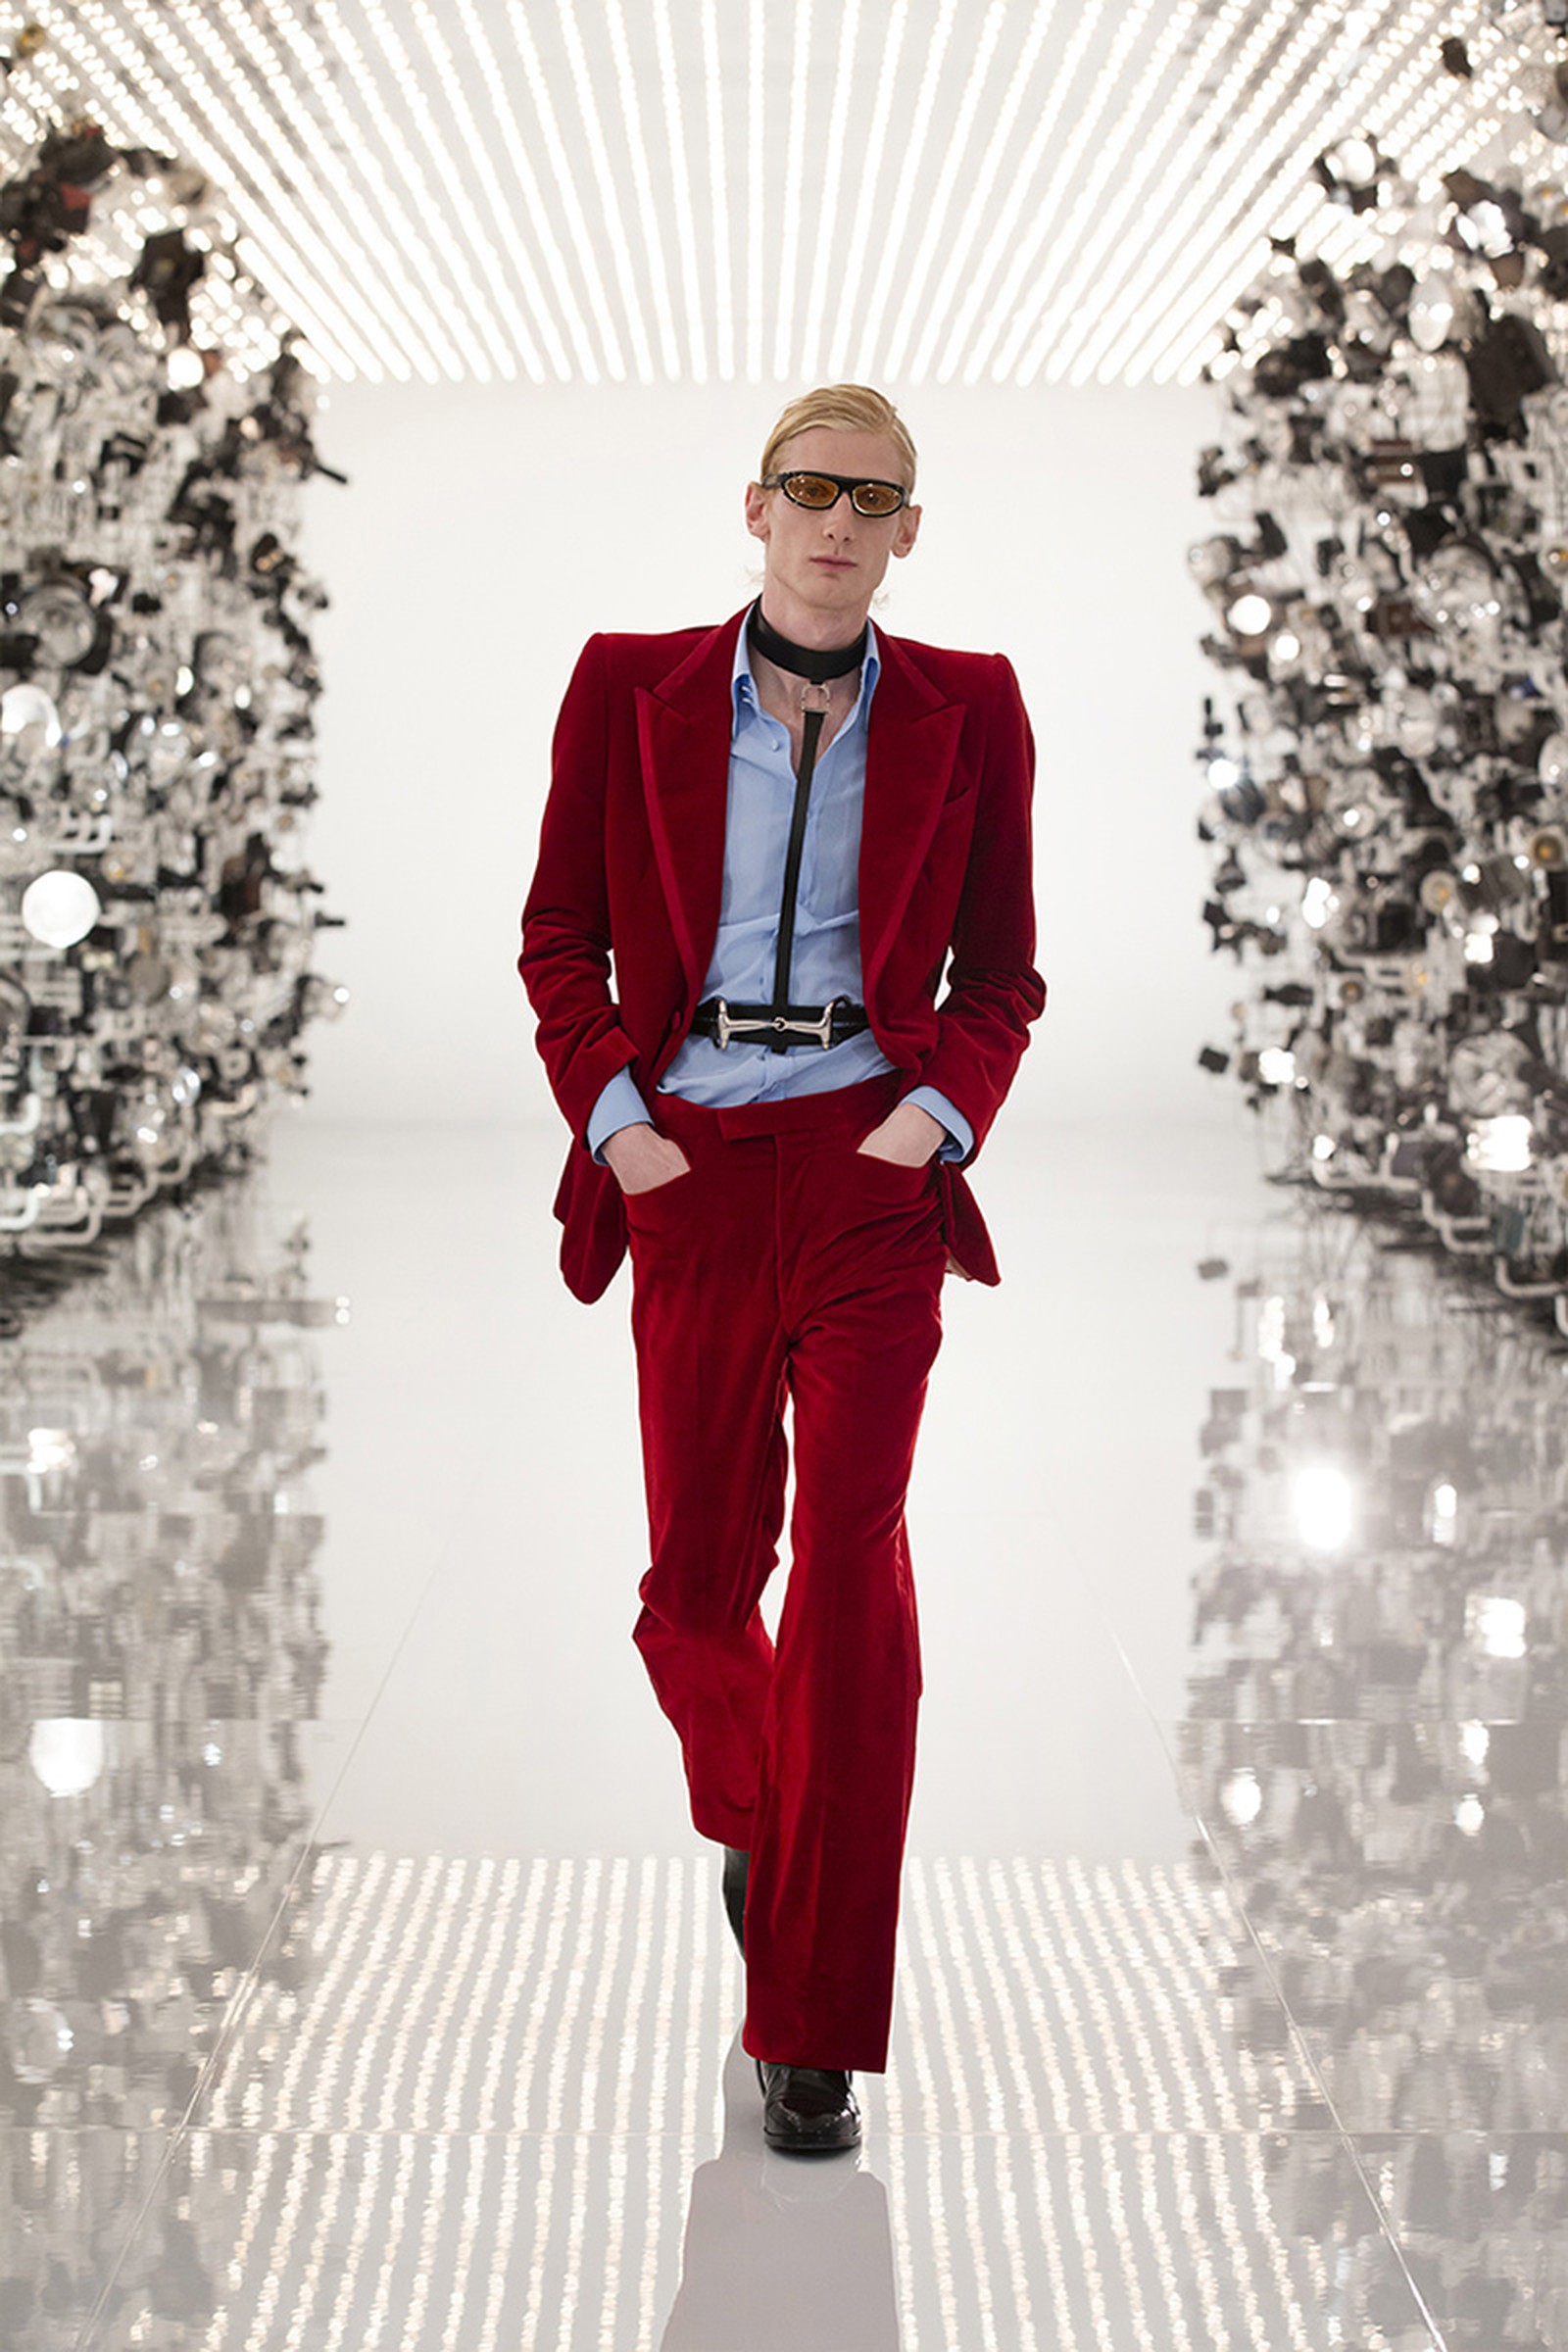 Gucci x Balenciaga first looks- red suits inspired by Tom Ford silhouette